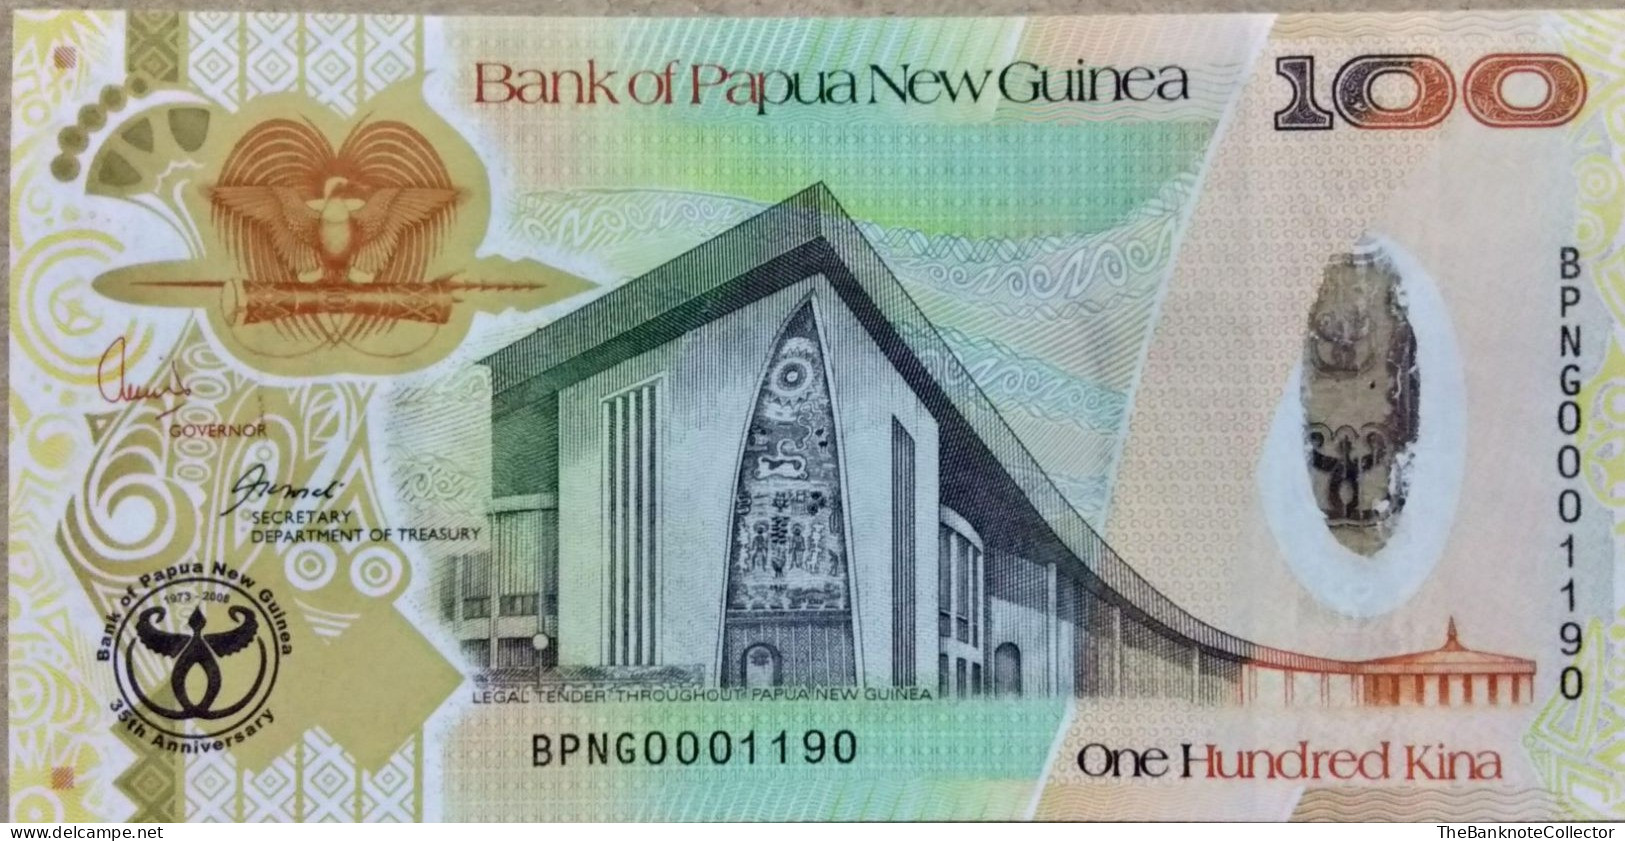 Papua New Guinea 100 Kina ND 2008 35th Anniversary Commemorative P-37 - Papouasie-Nouvelle-Guinée